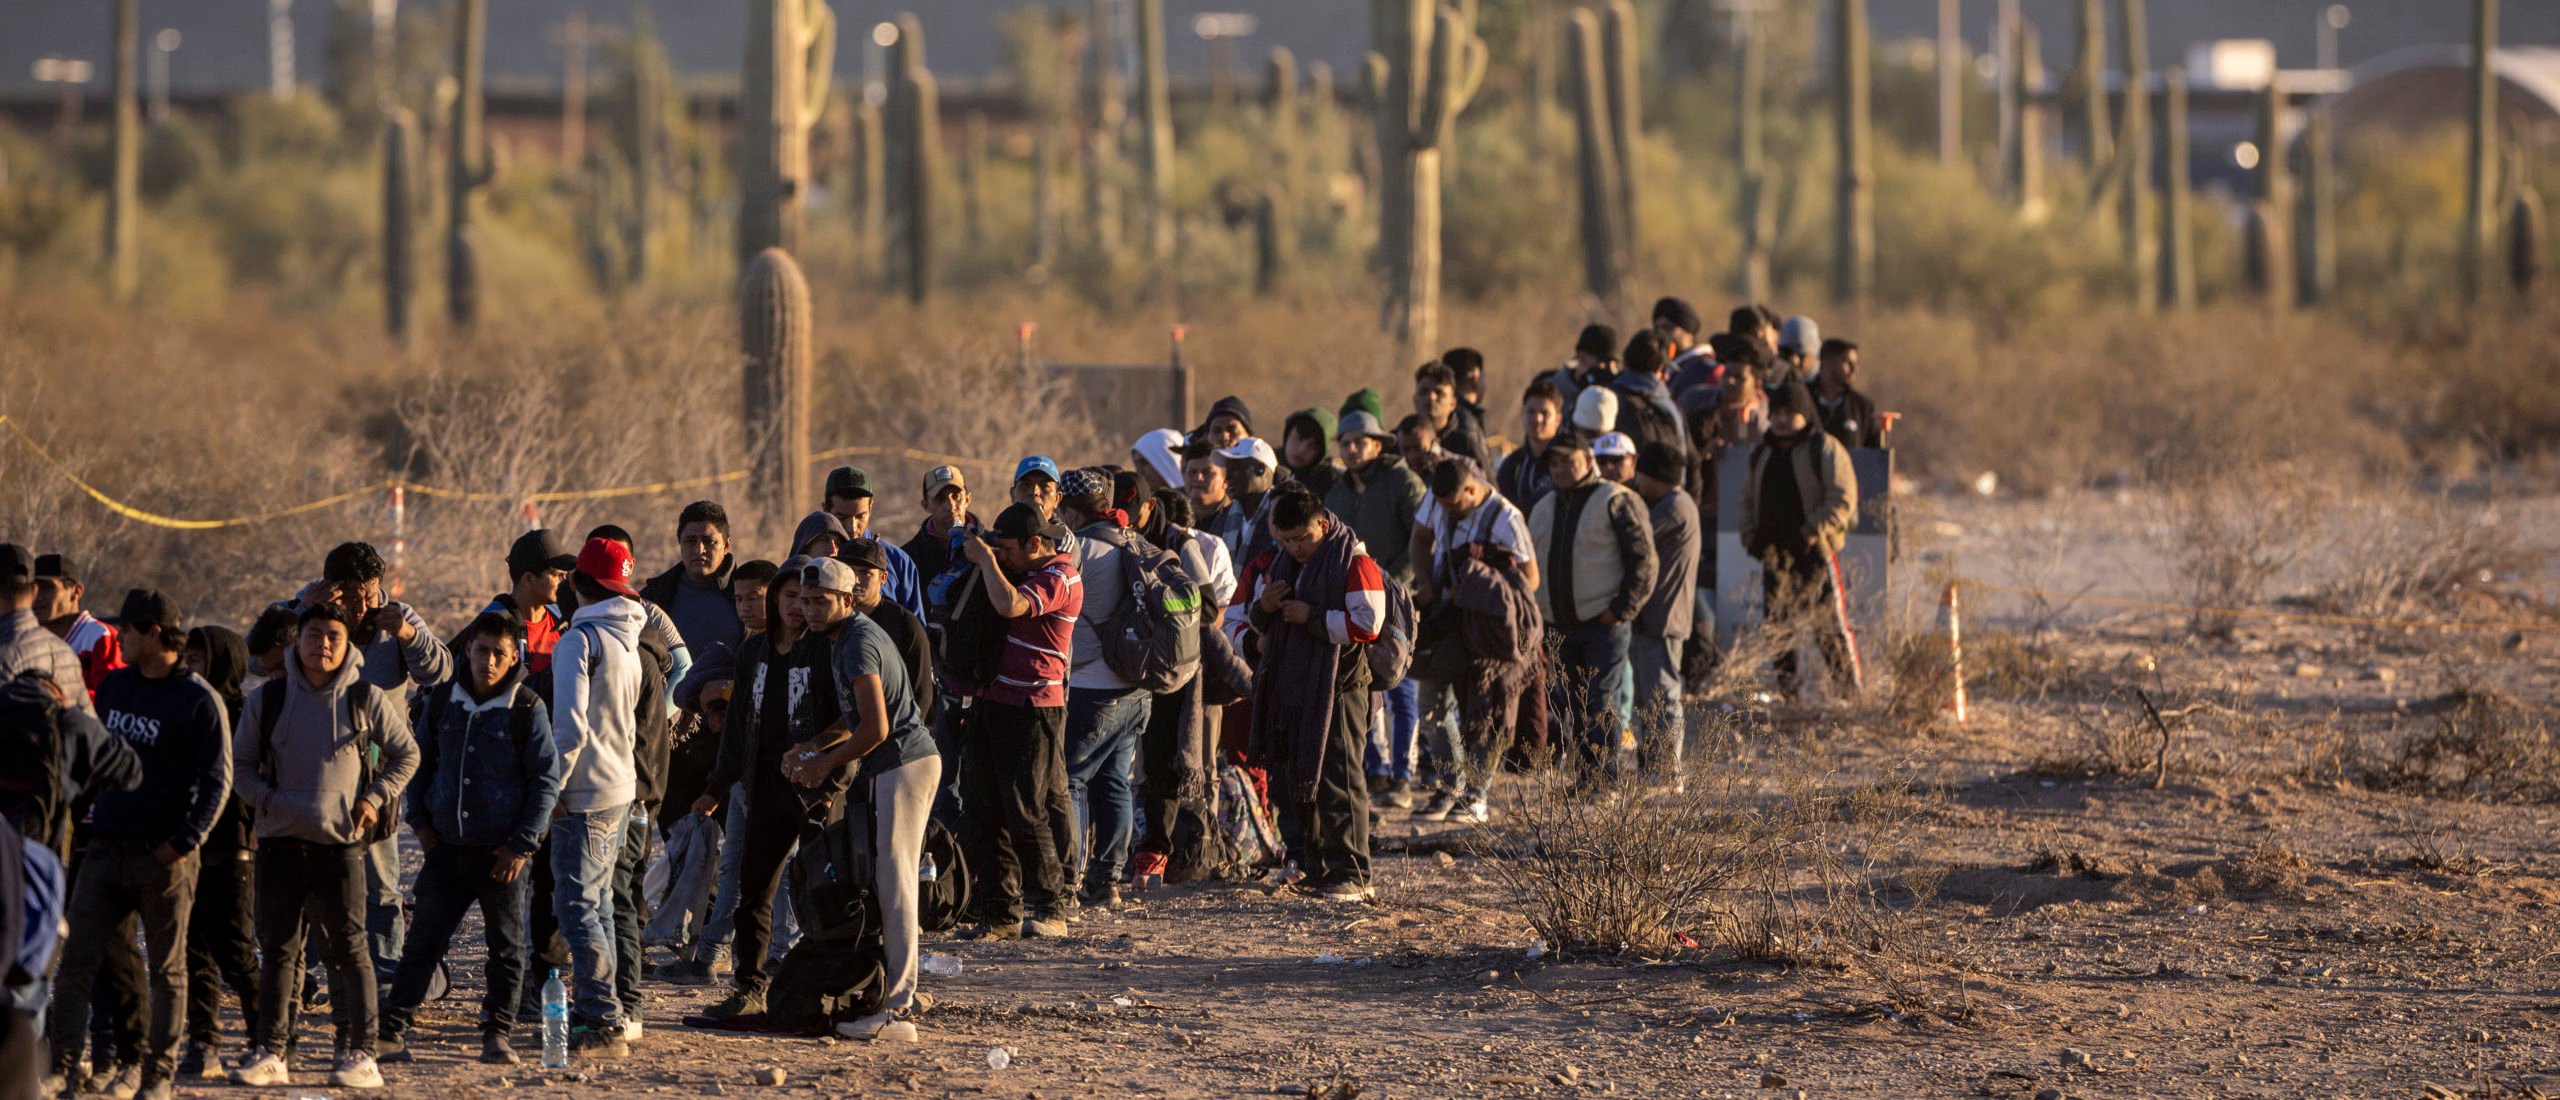 LUKEVILLE, ARIZONA - DECEMBER 07: Immigrants line up at a remote U.S. Border Patrol processing center after crossing the U.S.-Mexico border on December 07, 2023 in Lukeville, Arizona. (Photo by John Moore/Getty Images)